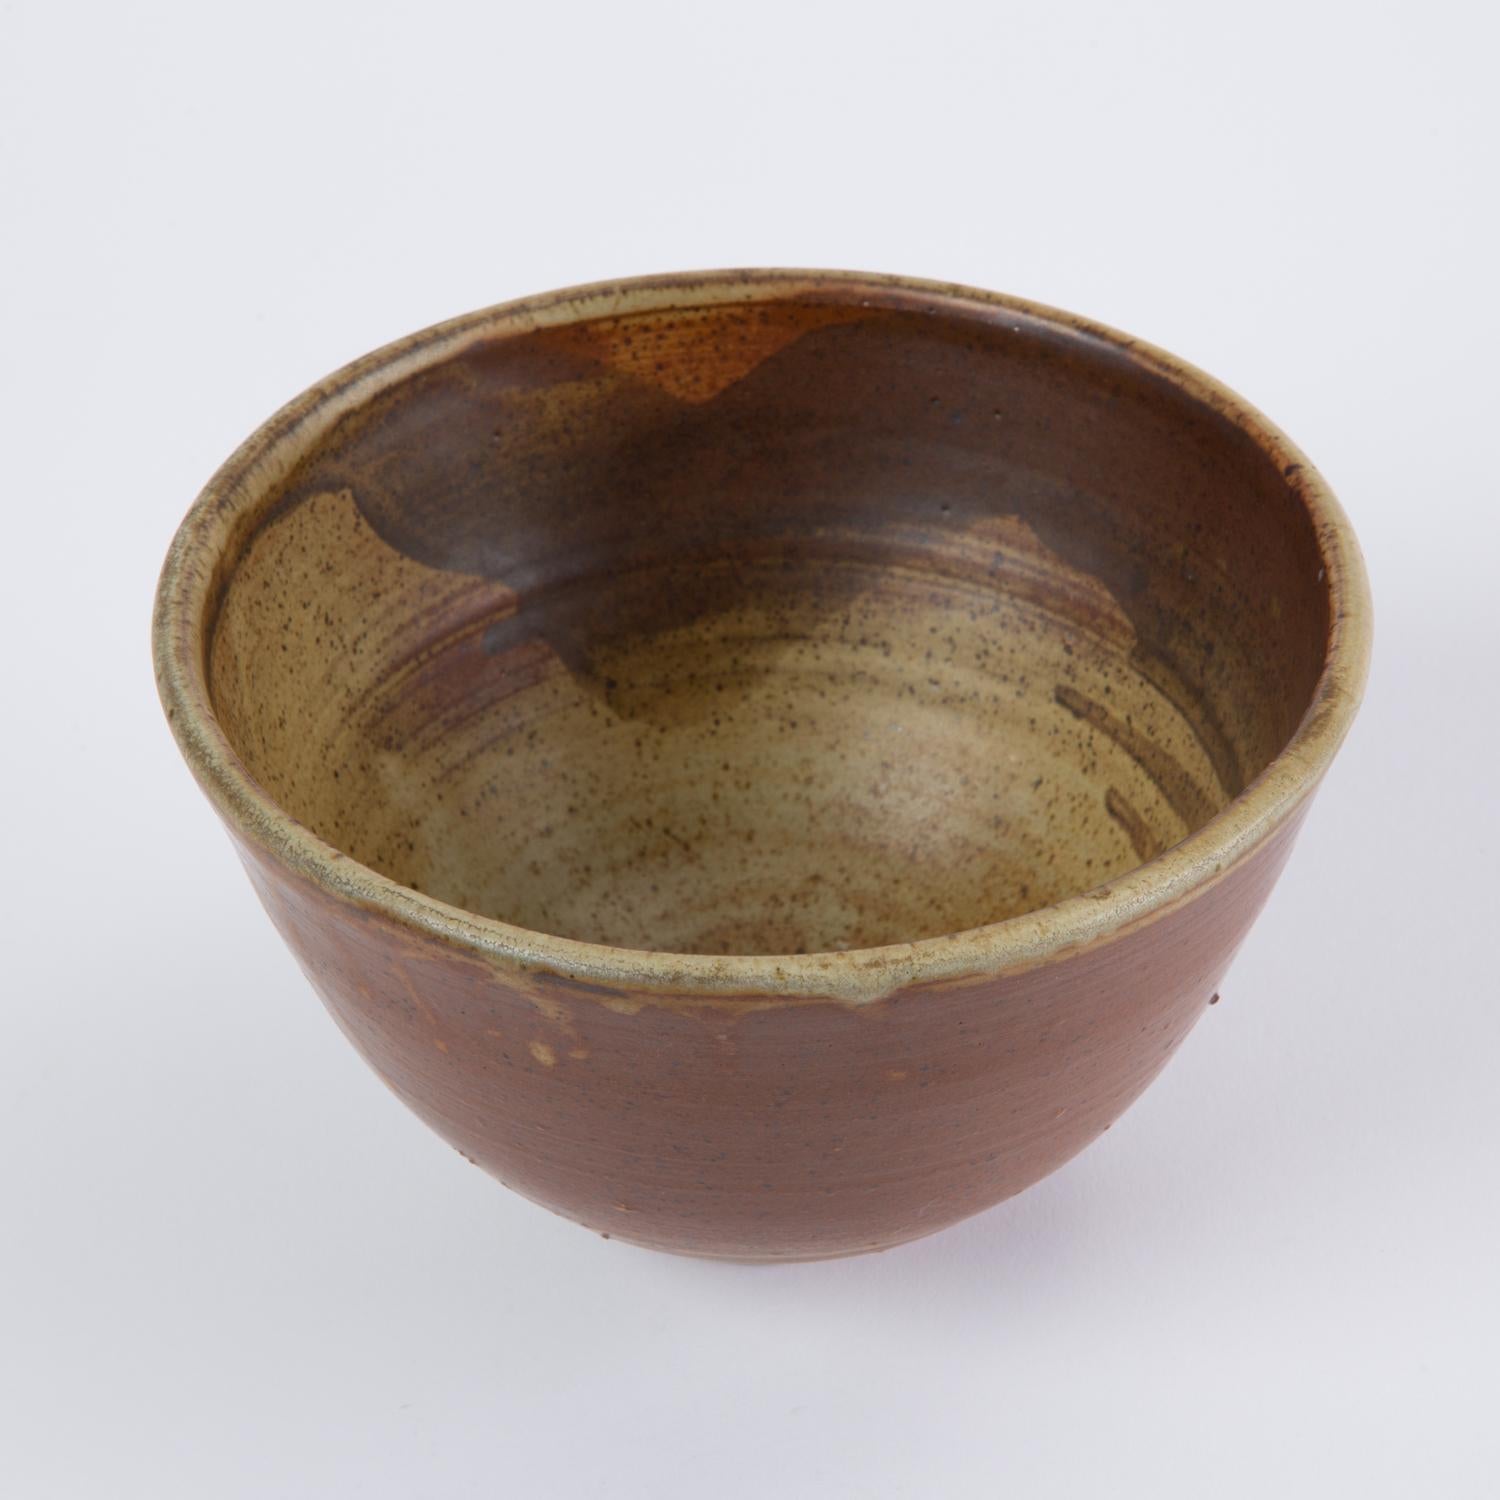 Ceramic Studio Pottery Bowl with Small Foot